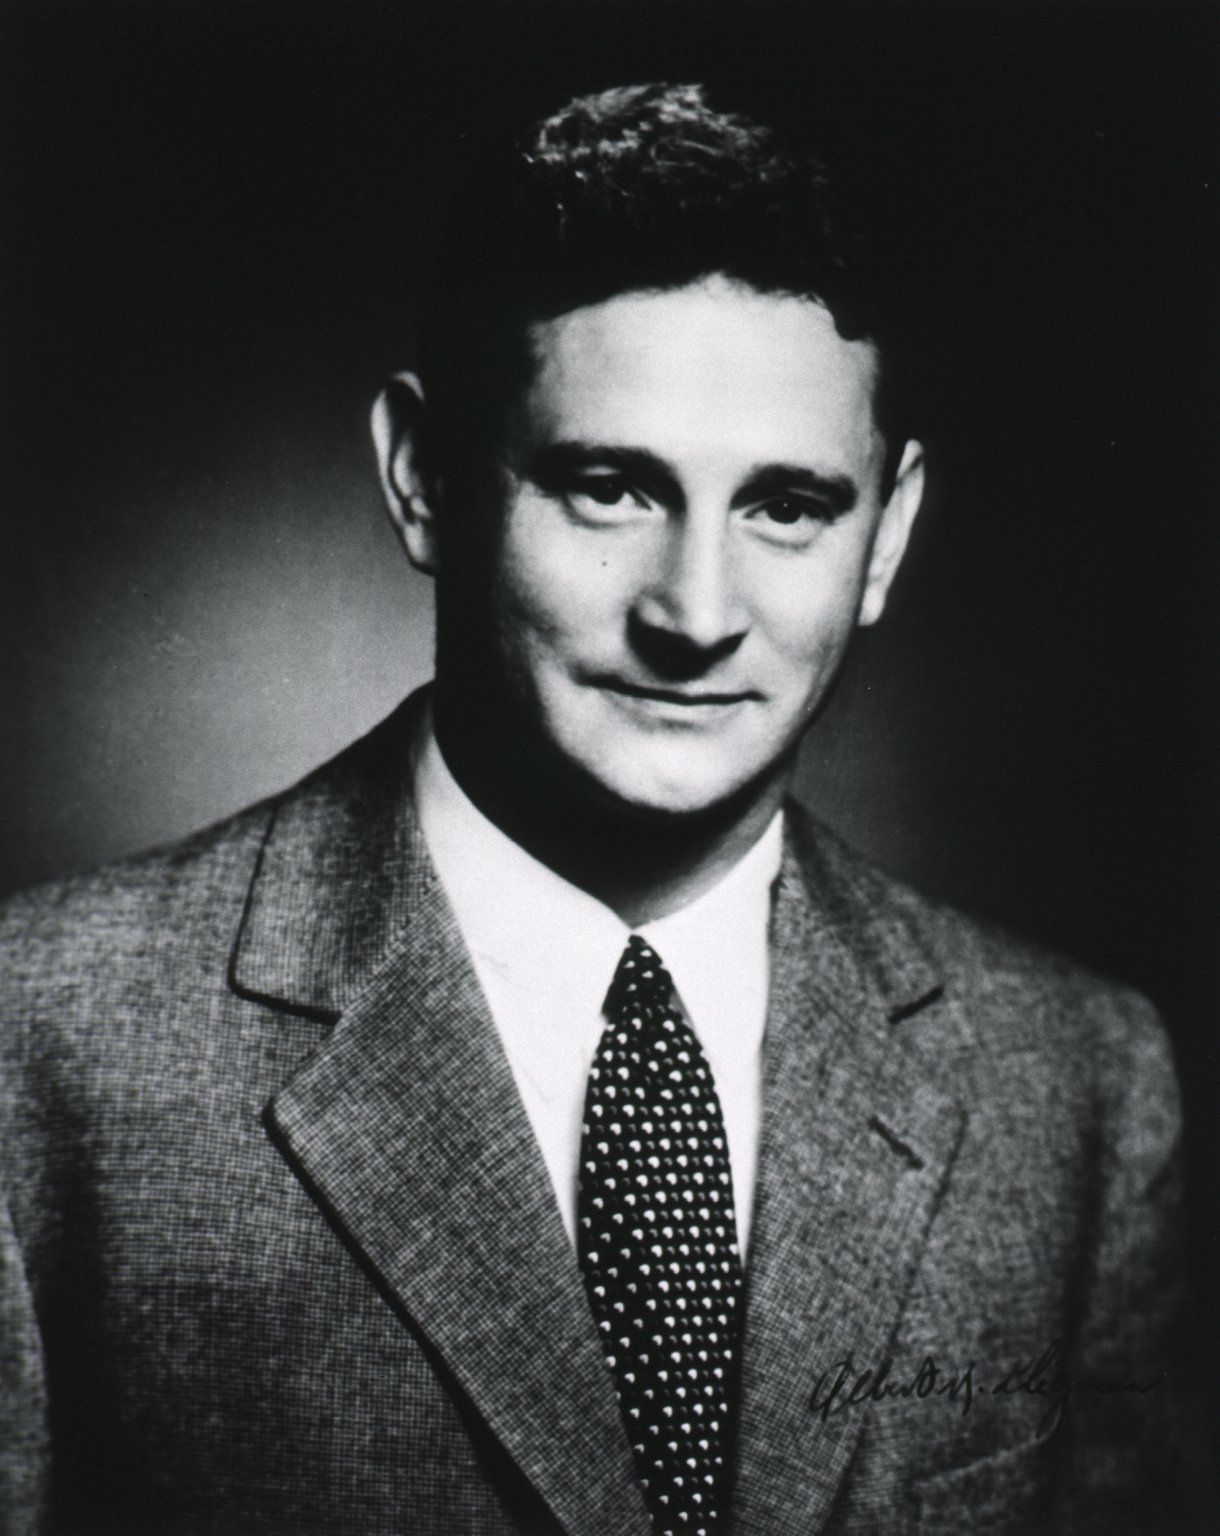 Albert Kligman in 1955. Image Source: National Library of Medicine; used under Fair Use